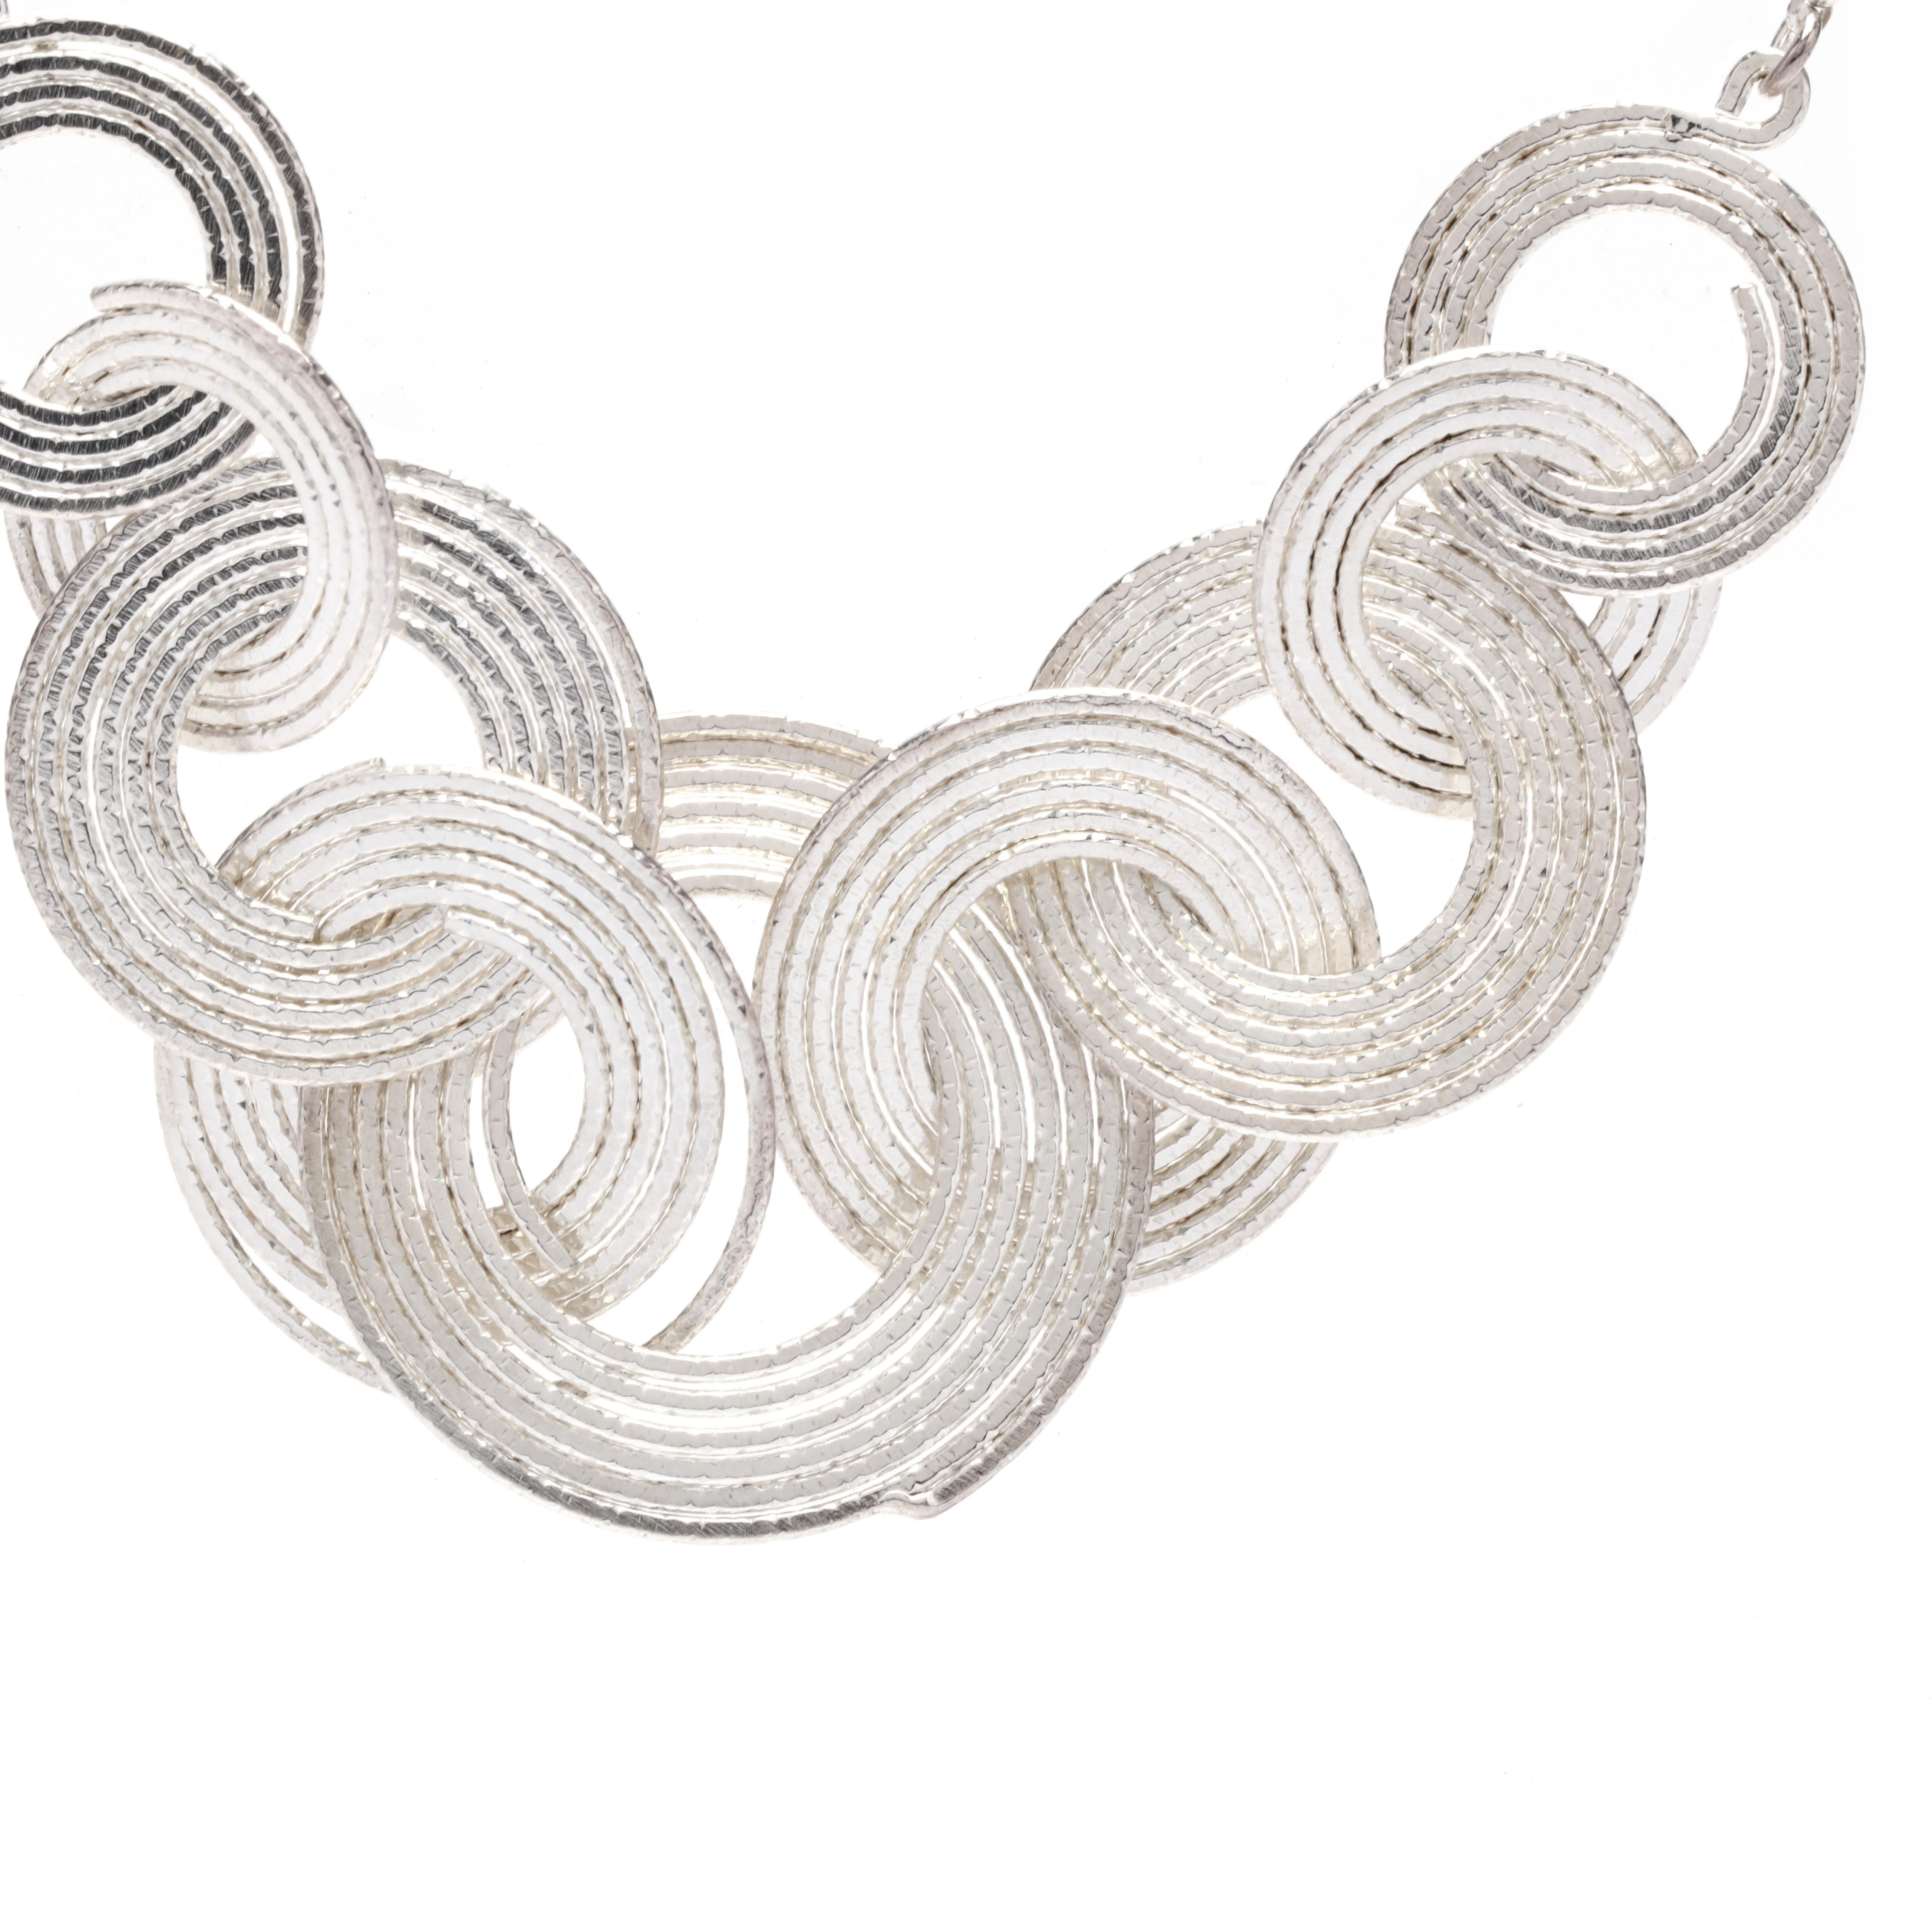 A sterling silver multi-circle necklace. This sparkle necklace features multi-size interlocking circles suspended from a thin cable chain with a lobster clasp.

Length: 18 in.

Chain Width: 1.65 mm

Pendant Width: 1 in.

Weight: 16.1 grams

Stamps: